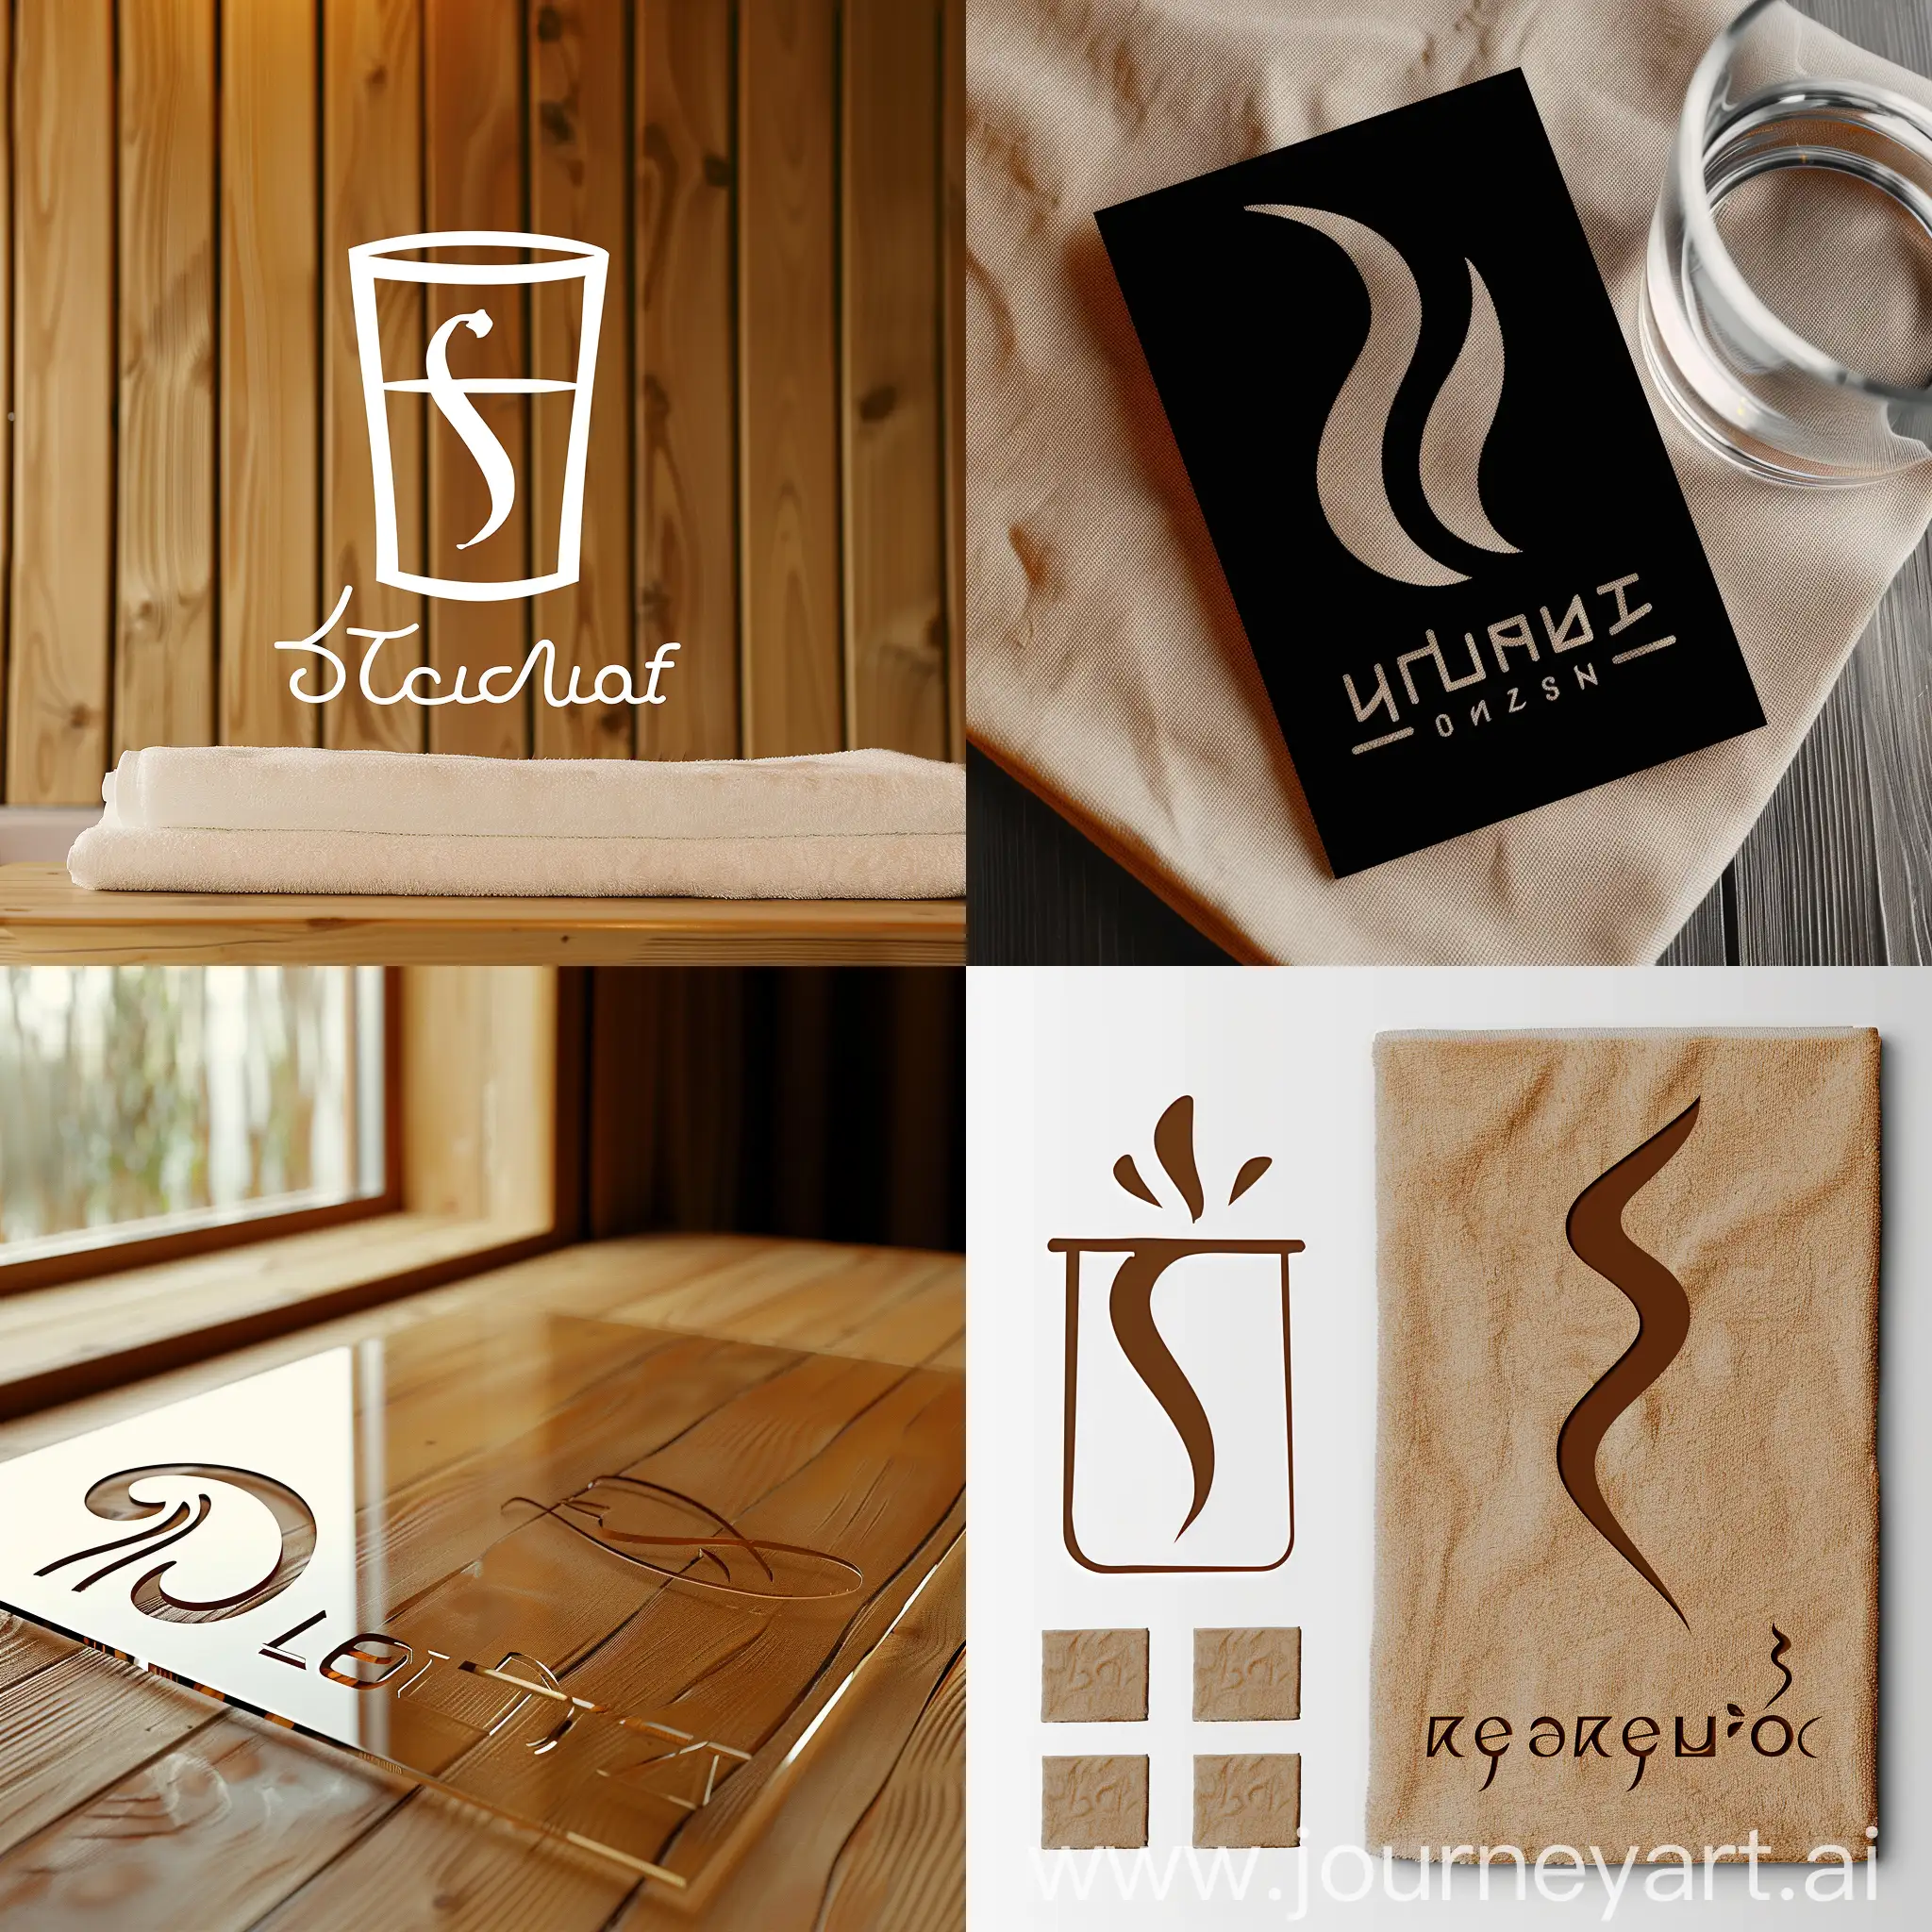 Logo-Placement-on-Glass-Towel-and-Wood-Surfaces